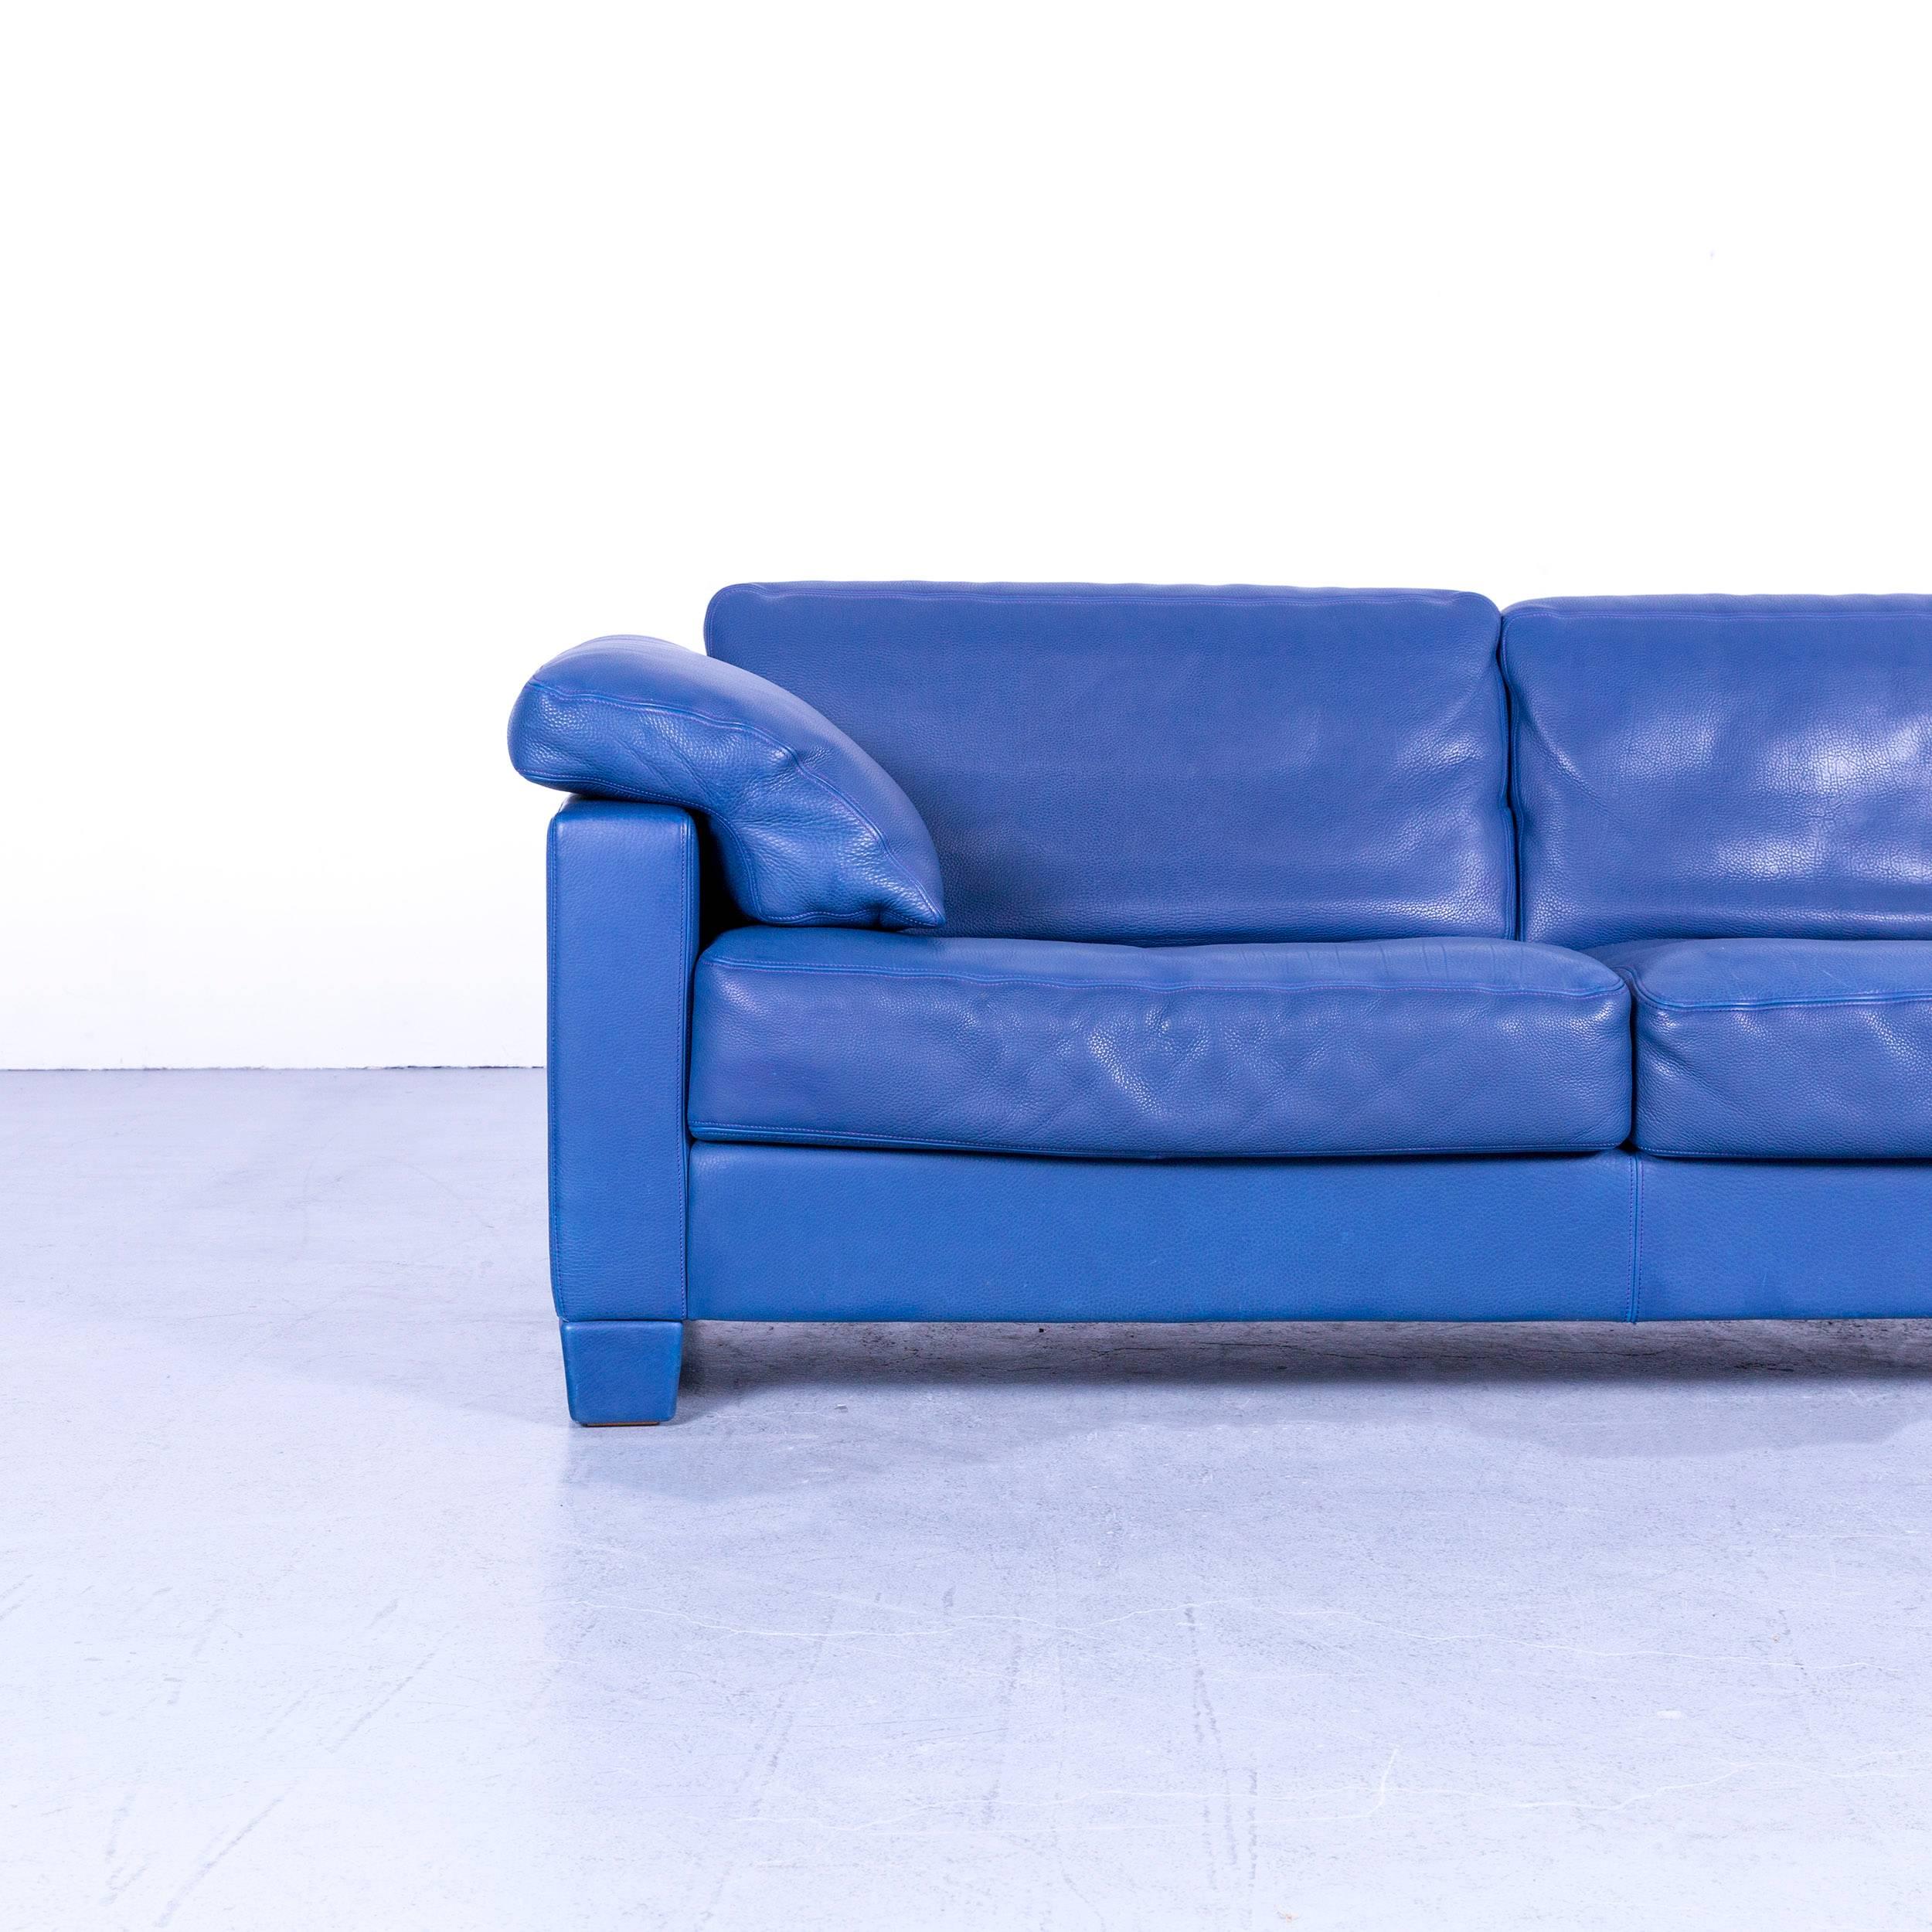 Swiss De Sede DS 17 Leather Sofa Blue Three-Seat Couch